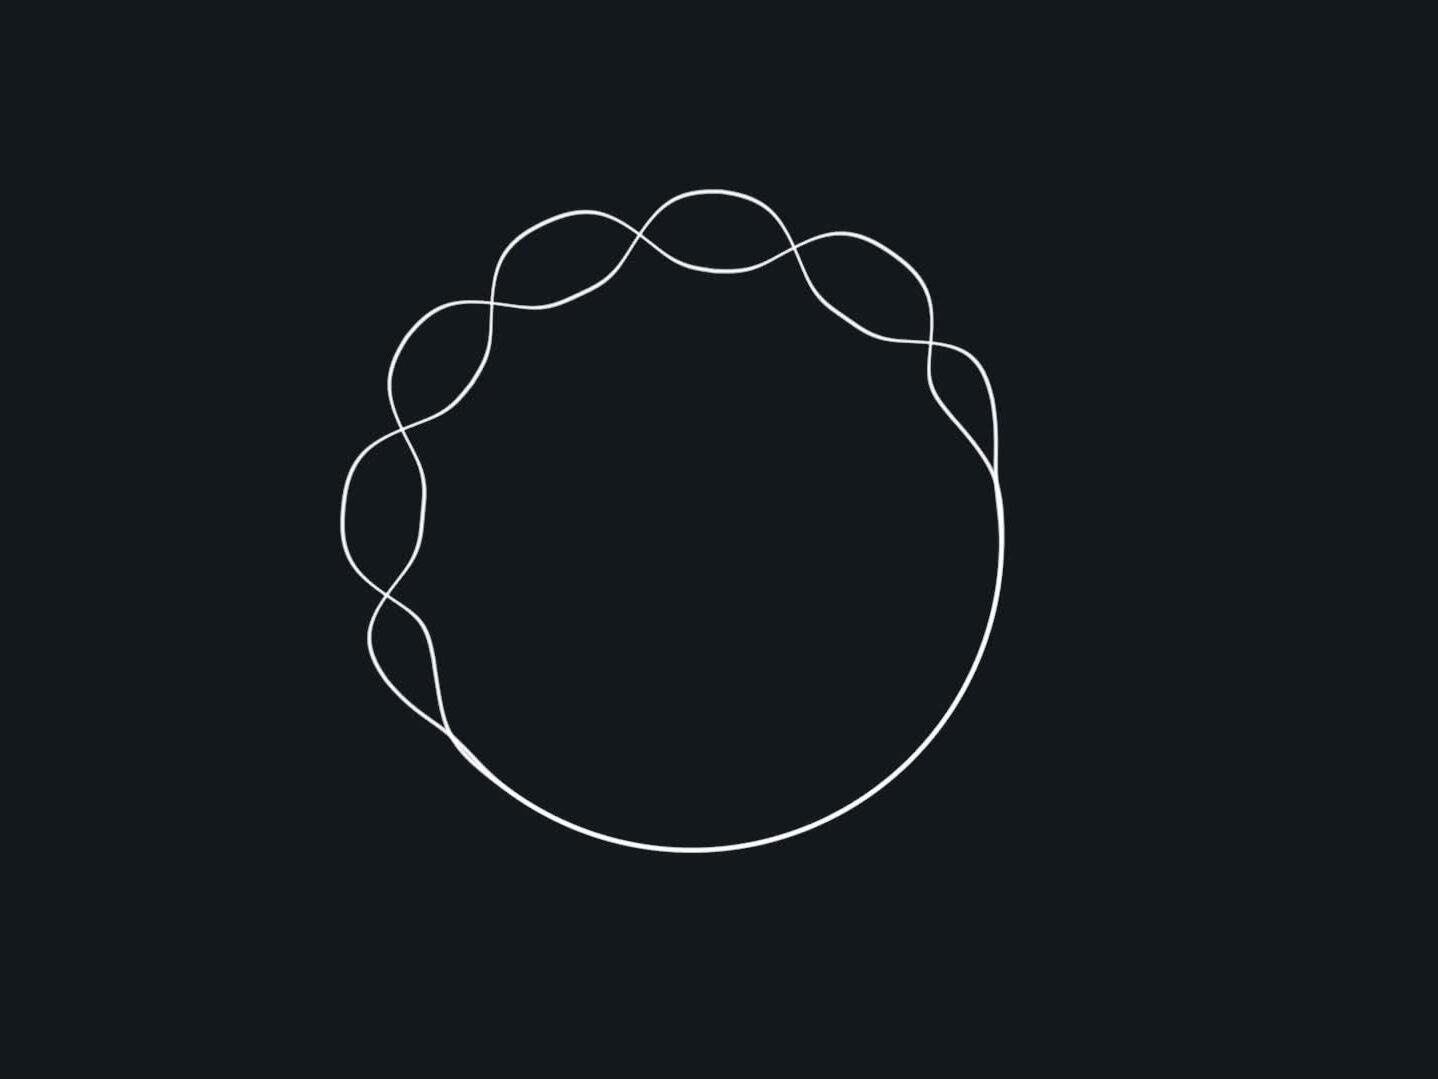 Two lines moving around in the shape of a circle